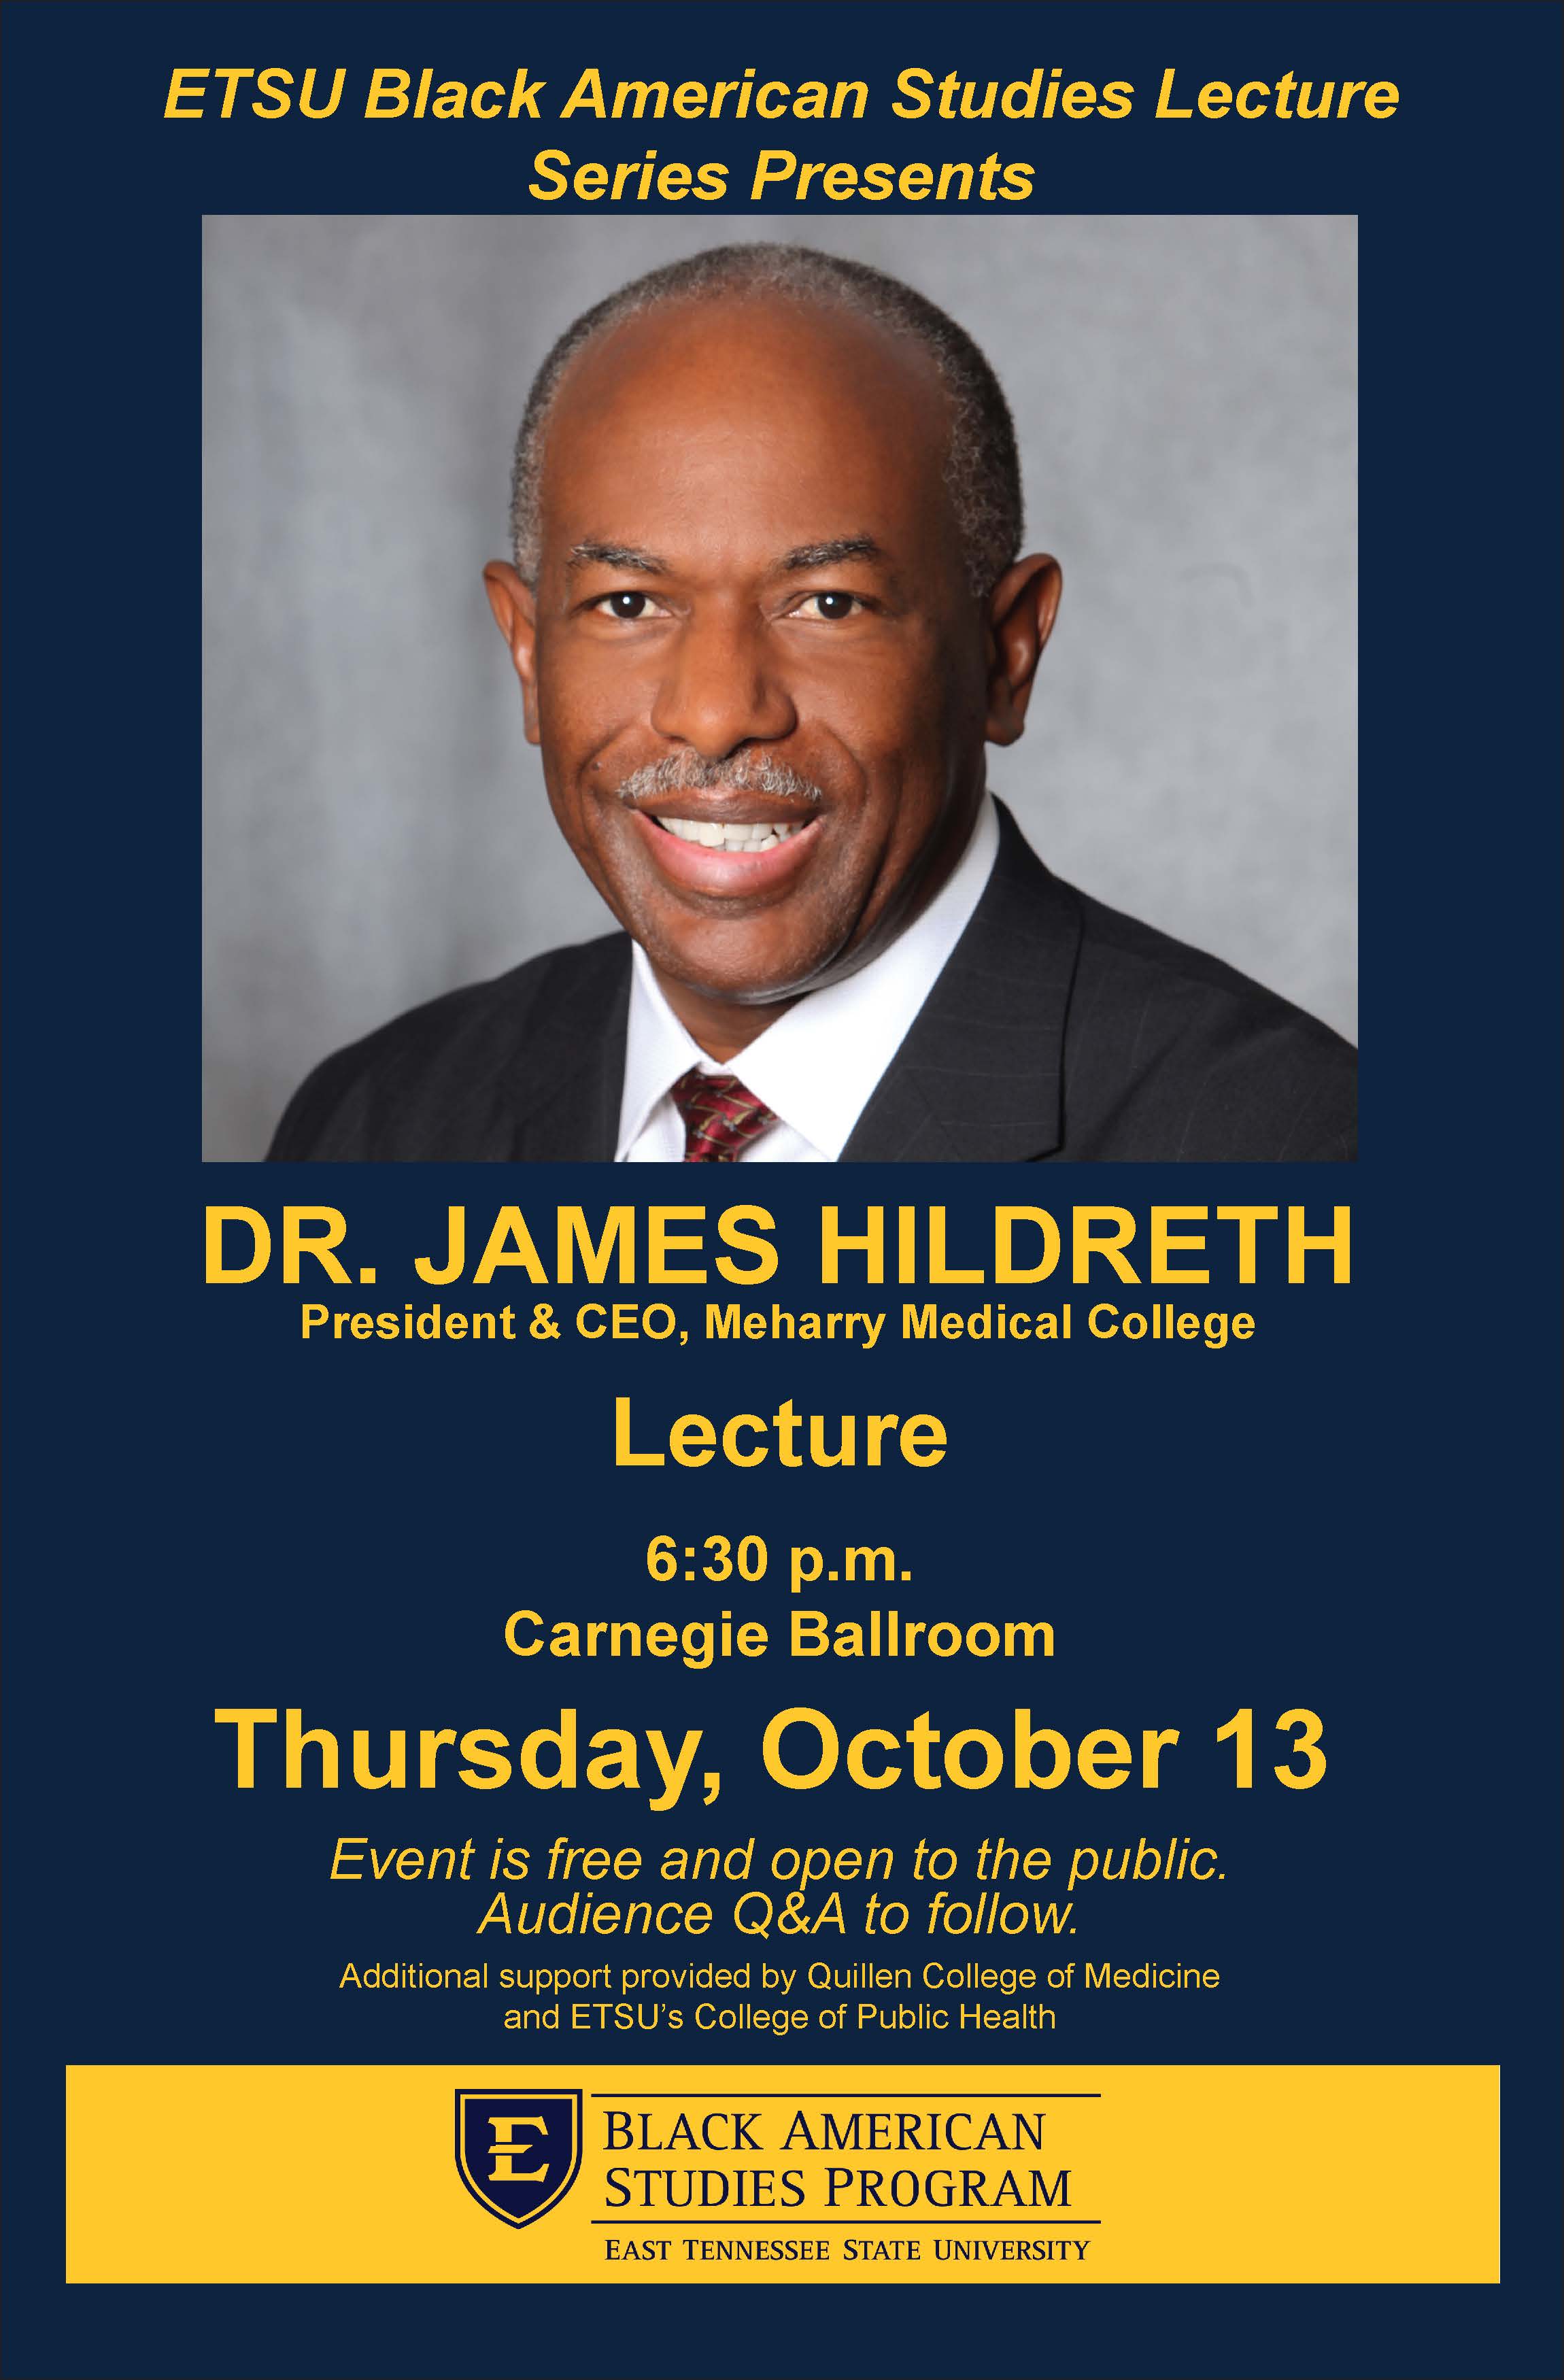 Dr. James Hildreth poster with event information detailed in the commentary above